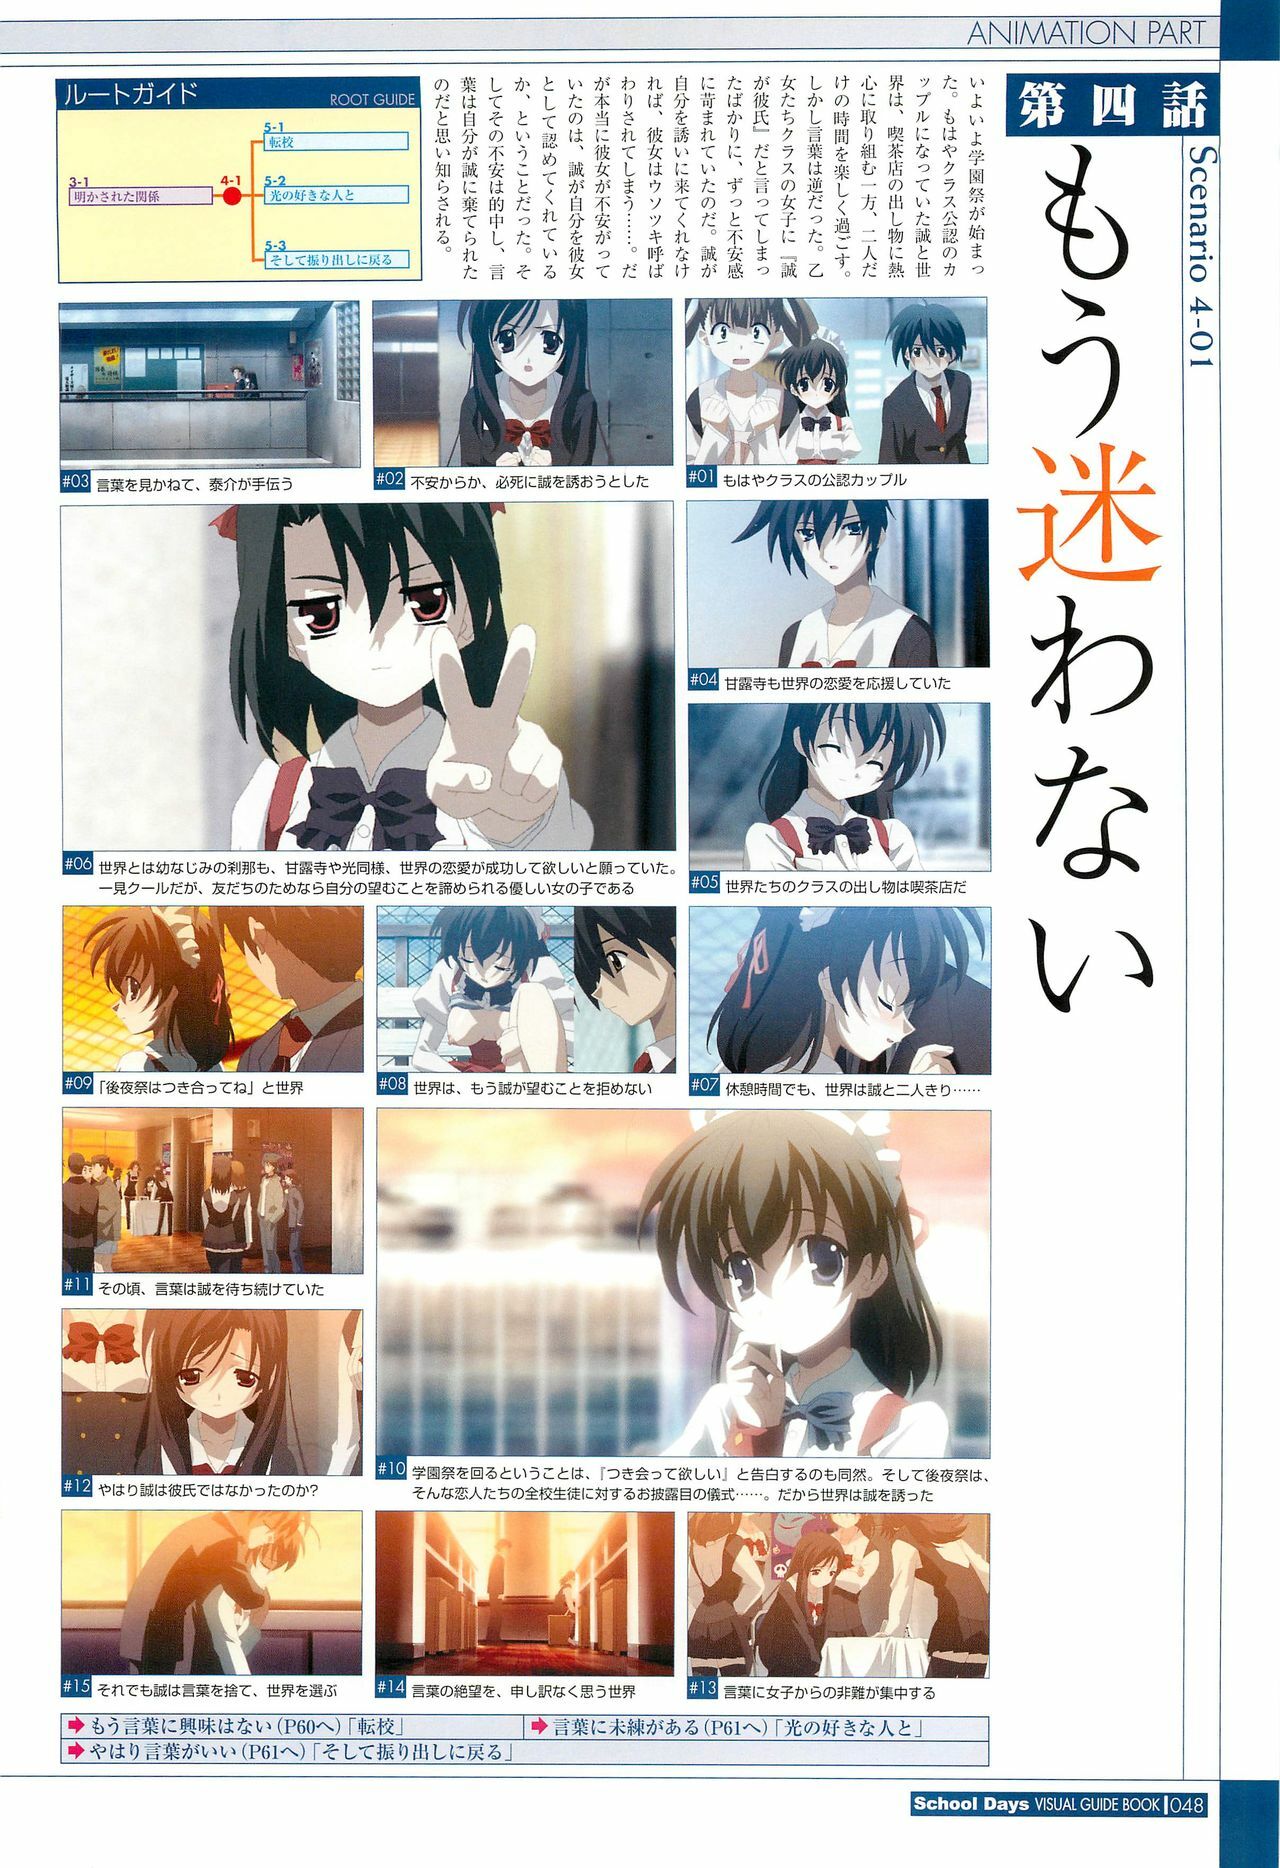 School Days Visual Guide Book page 50 full